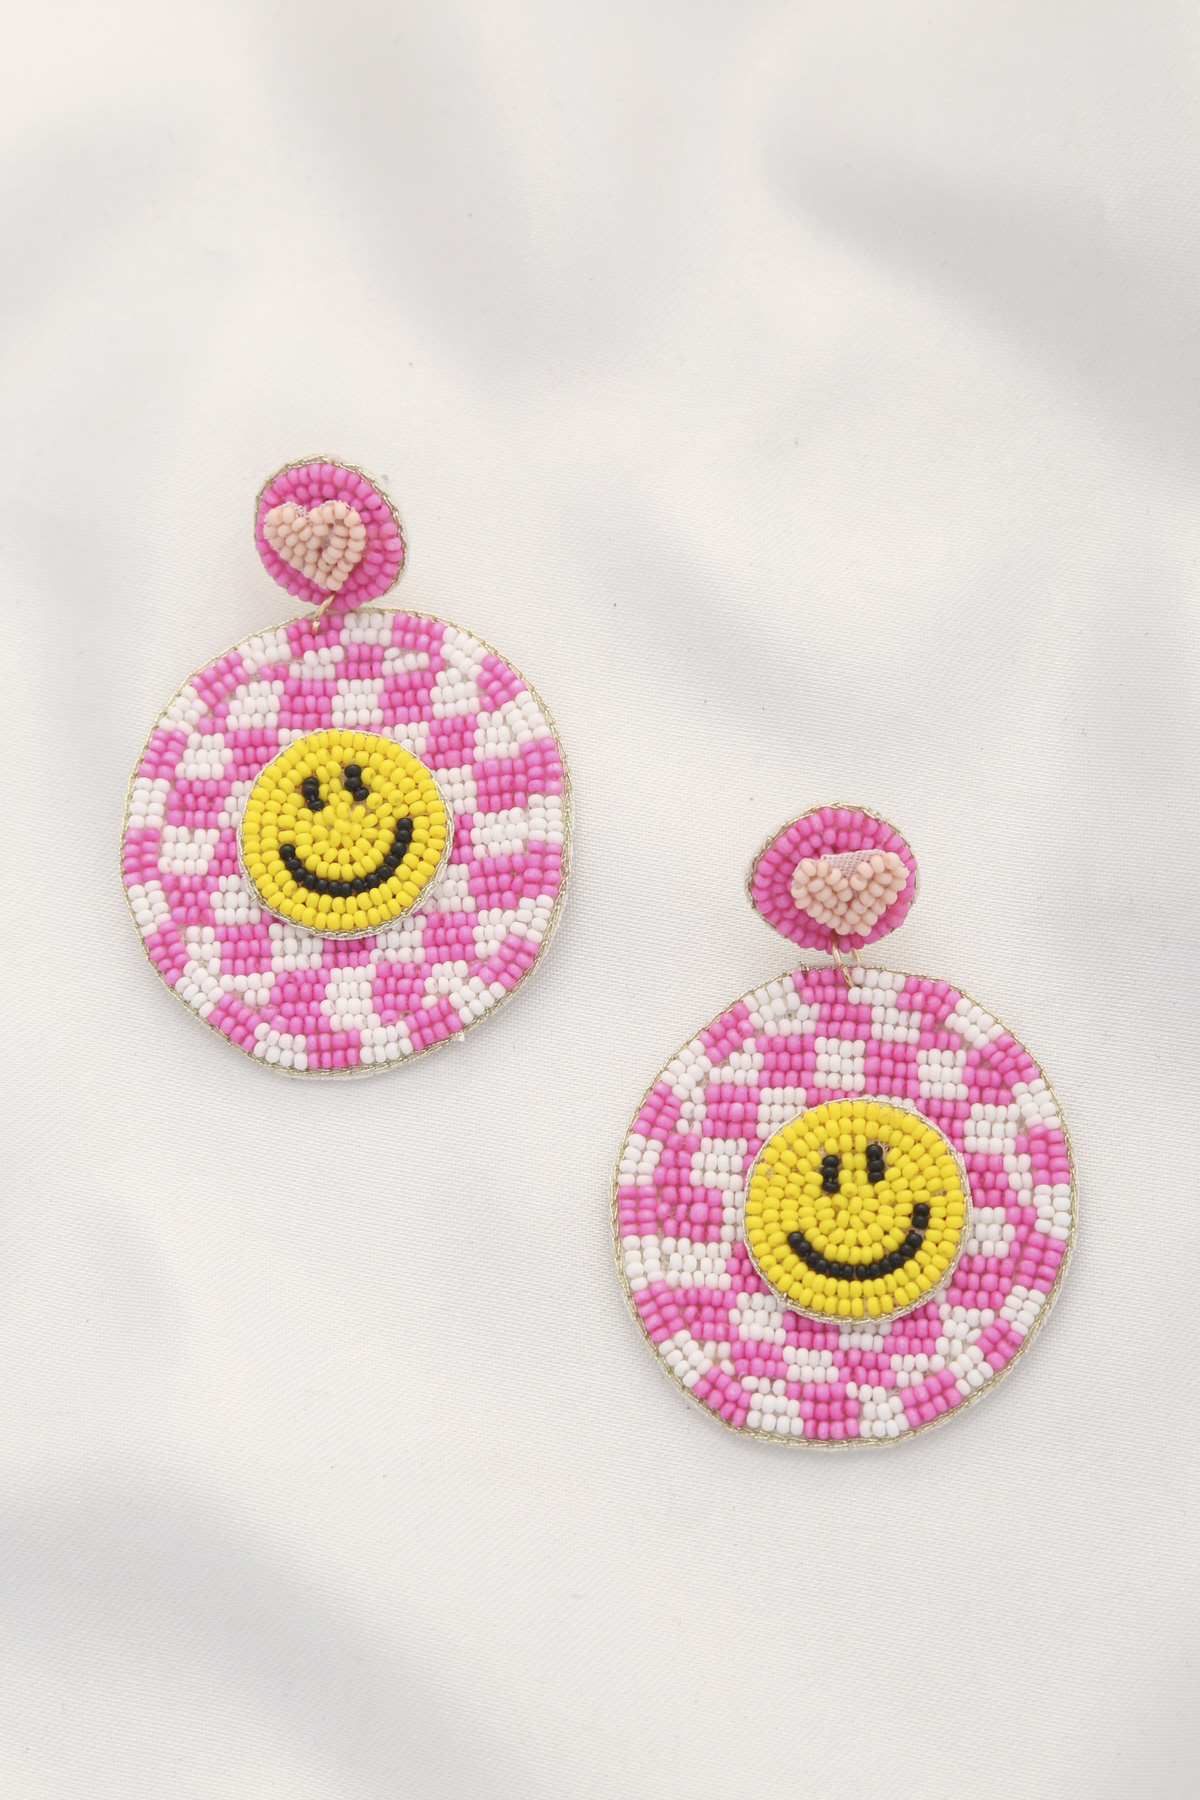 SEED BEAD HAPPY FACE ROUND DANGLE EARRING